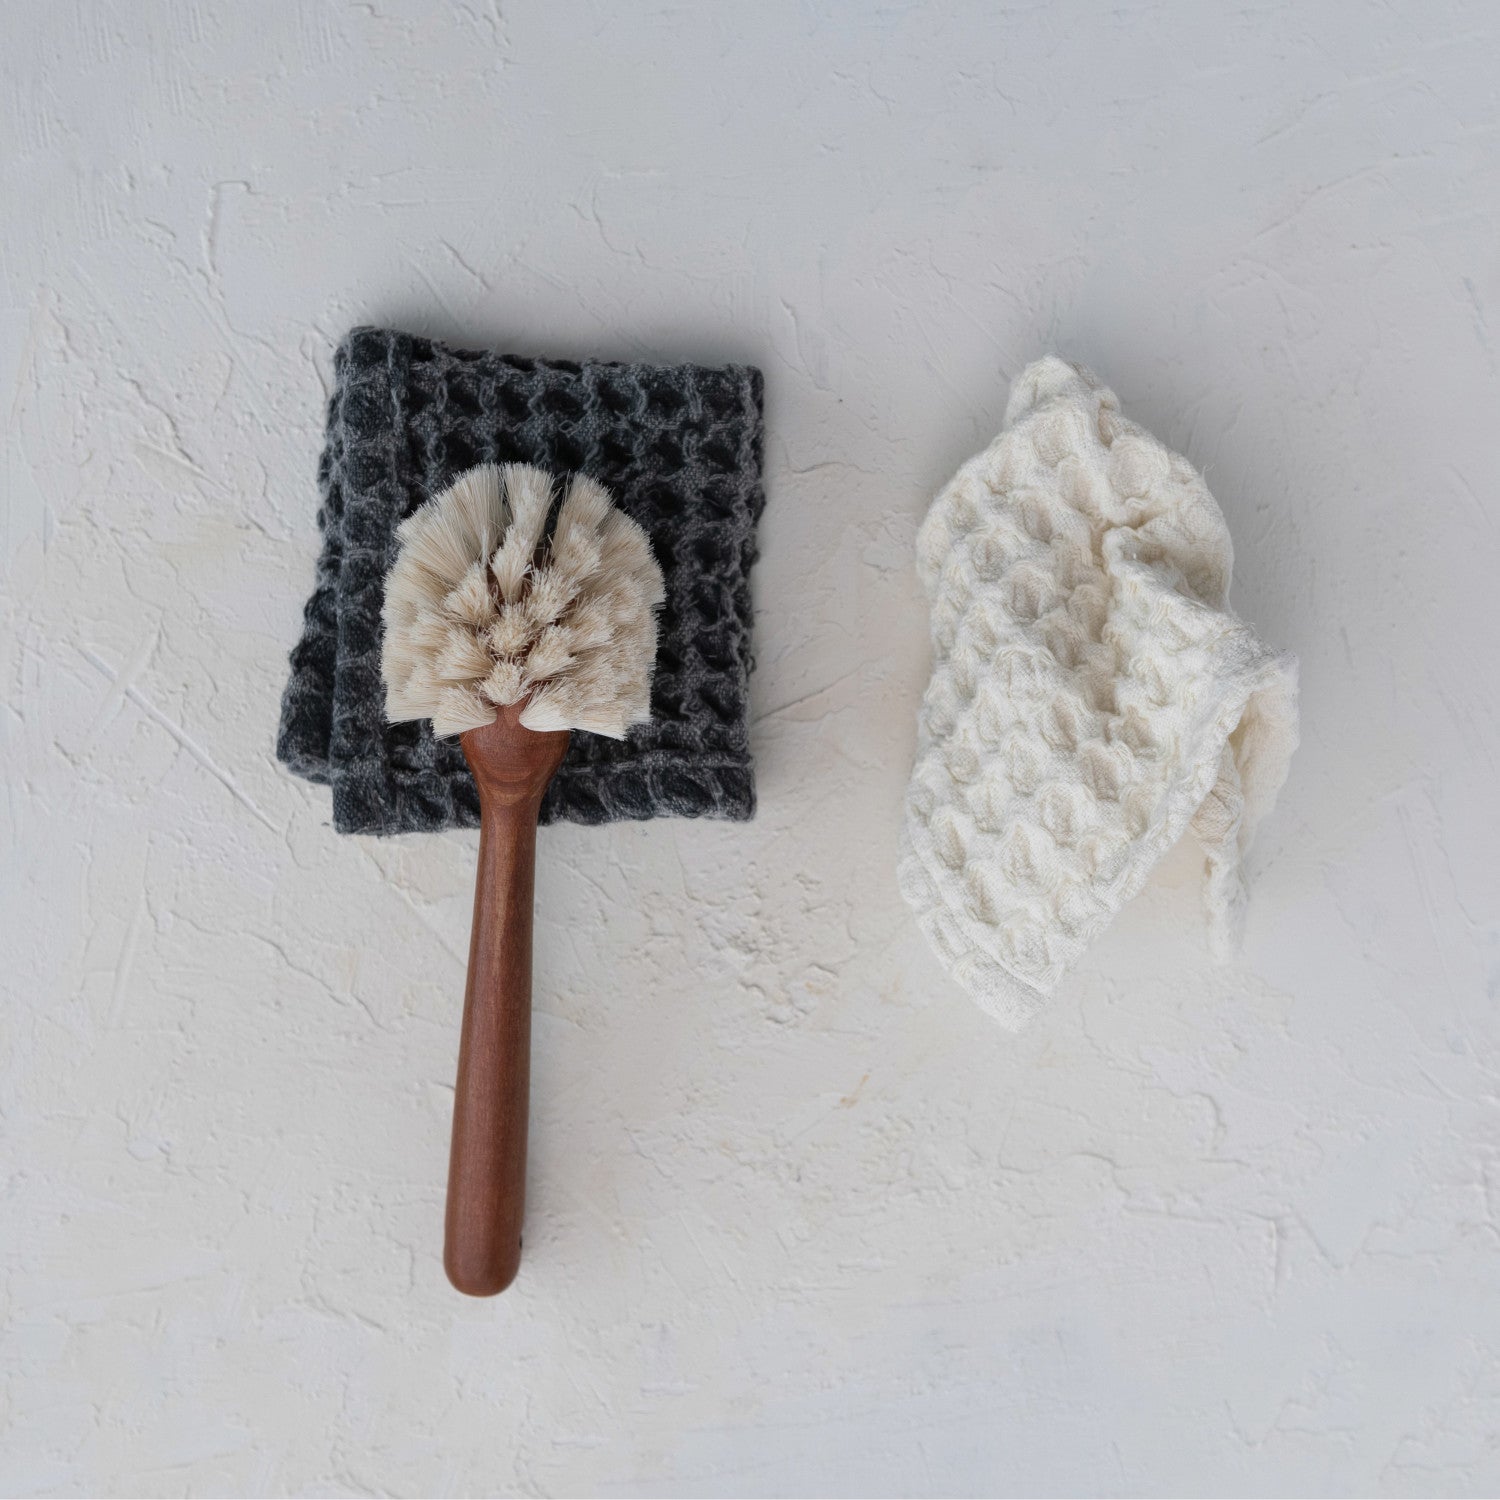 Square Cotton Dish Towels, Cotton Waffle Woven Kitchen Tableware